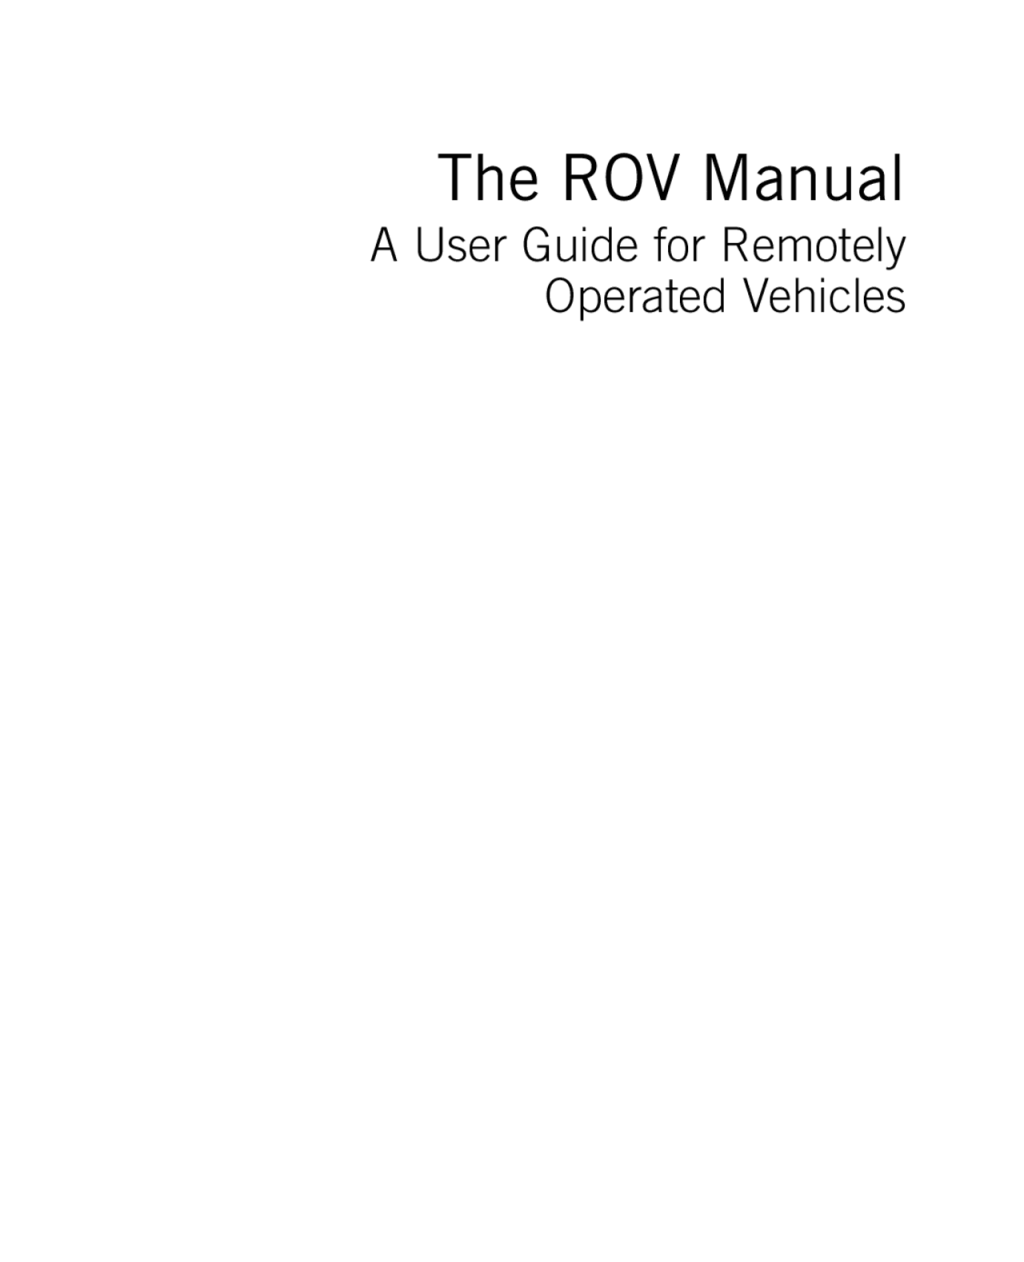 Picture of: The ROV Manual – A User Guide for Remotely Operated Vehicles